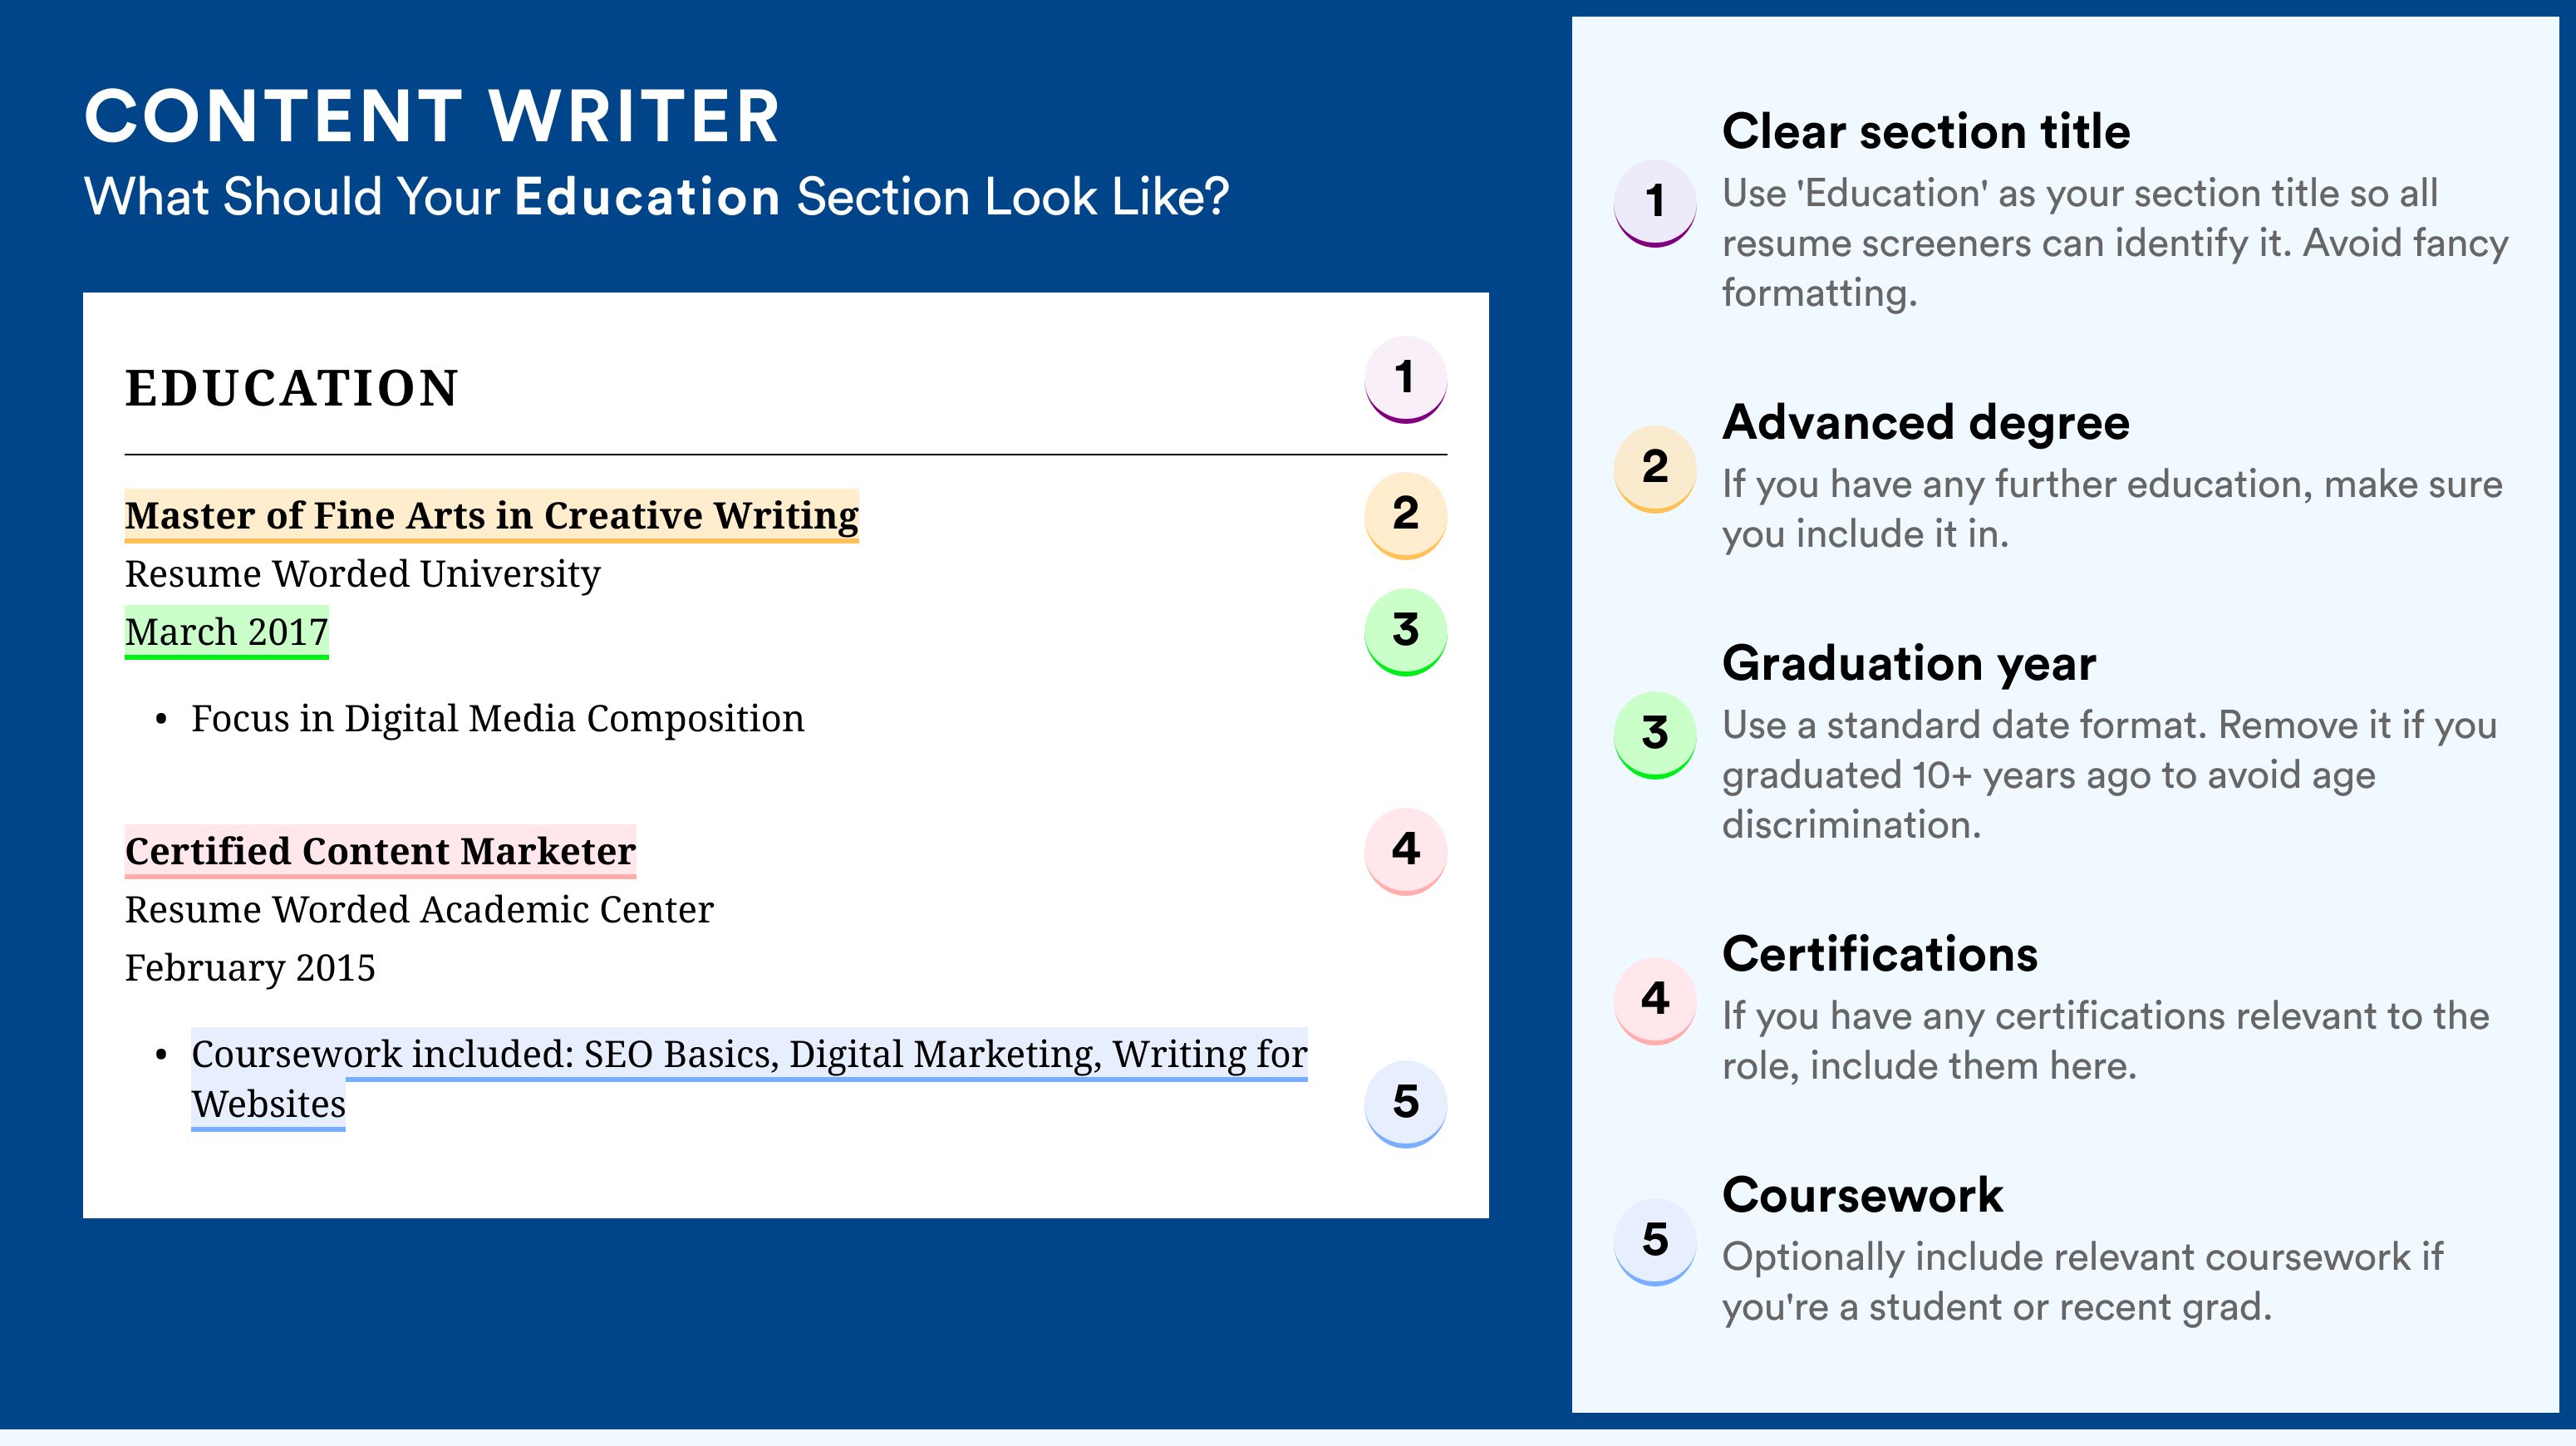 How To Write An Education Section - Content Writer Roles